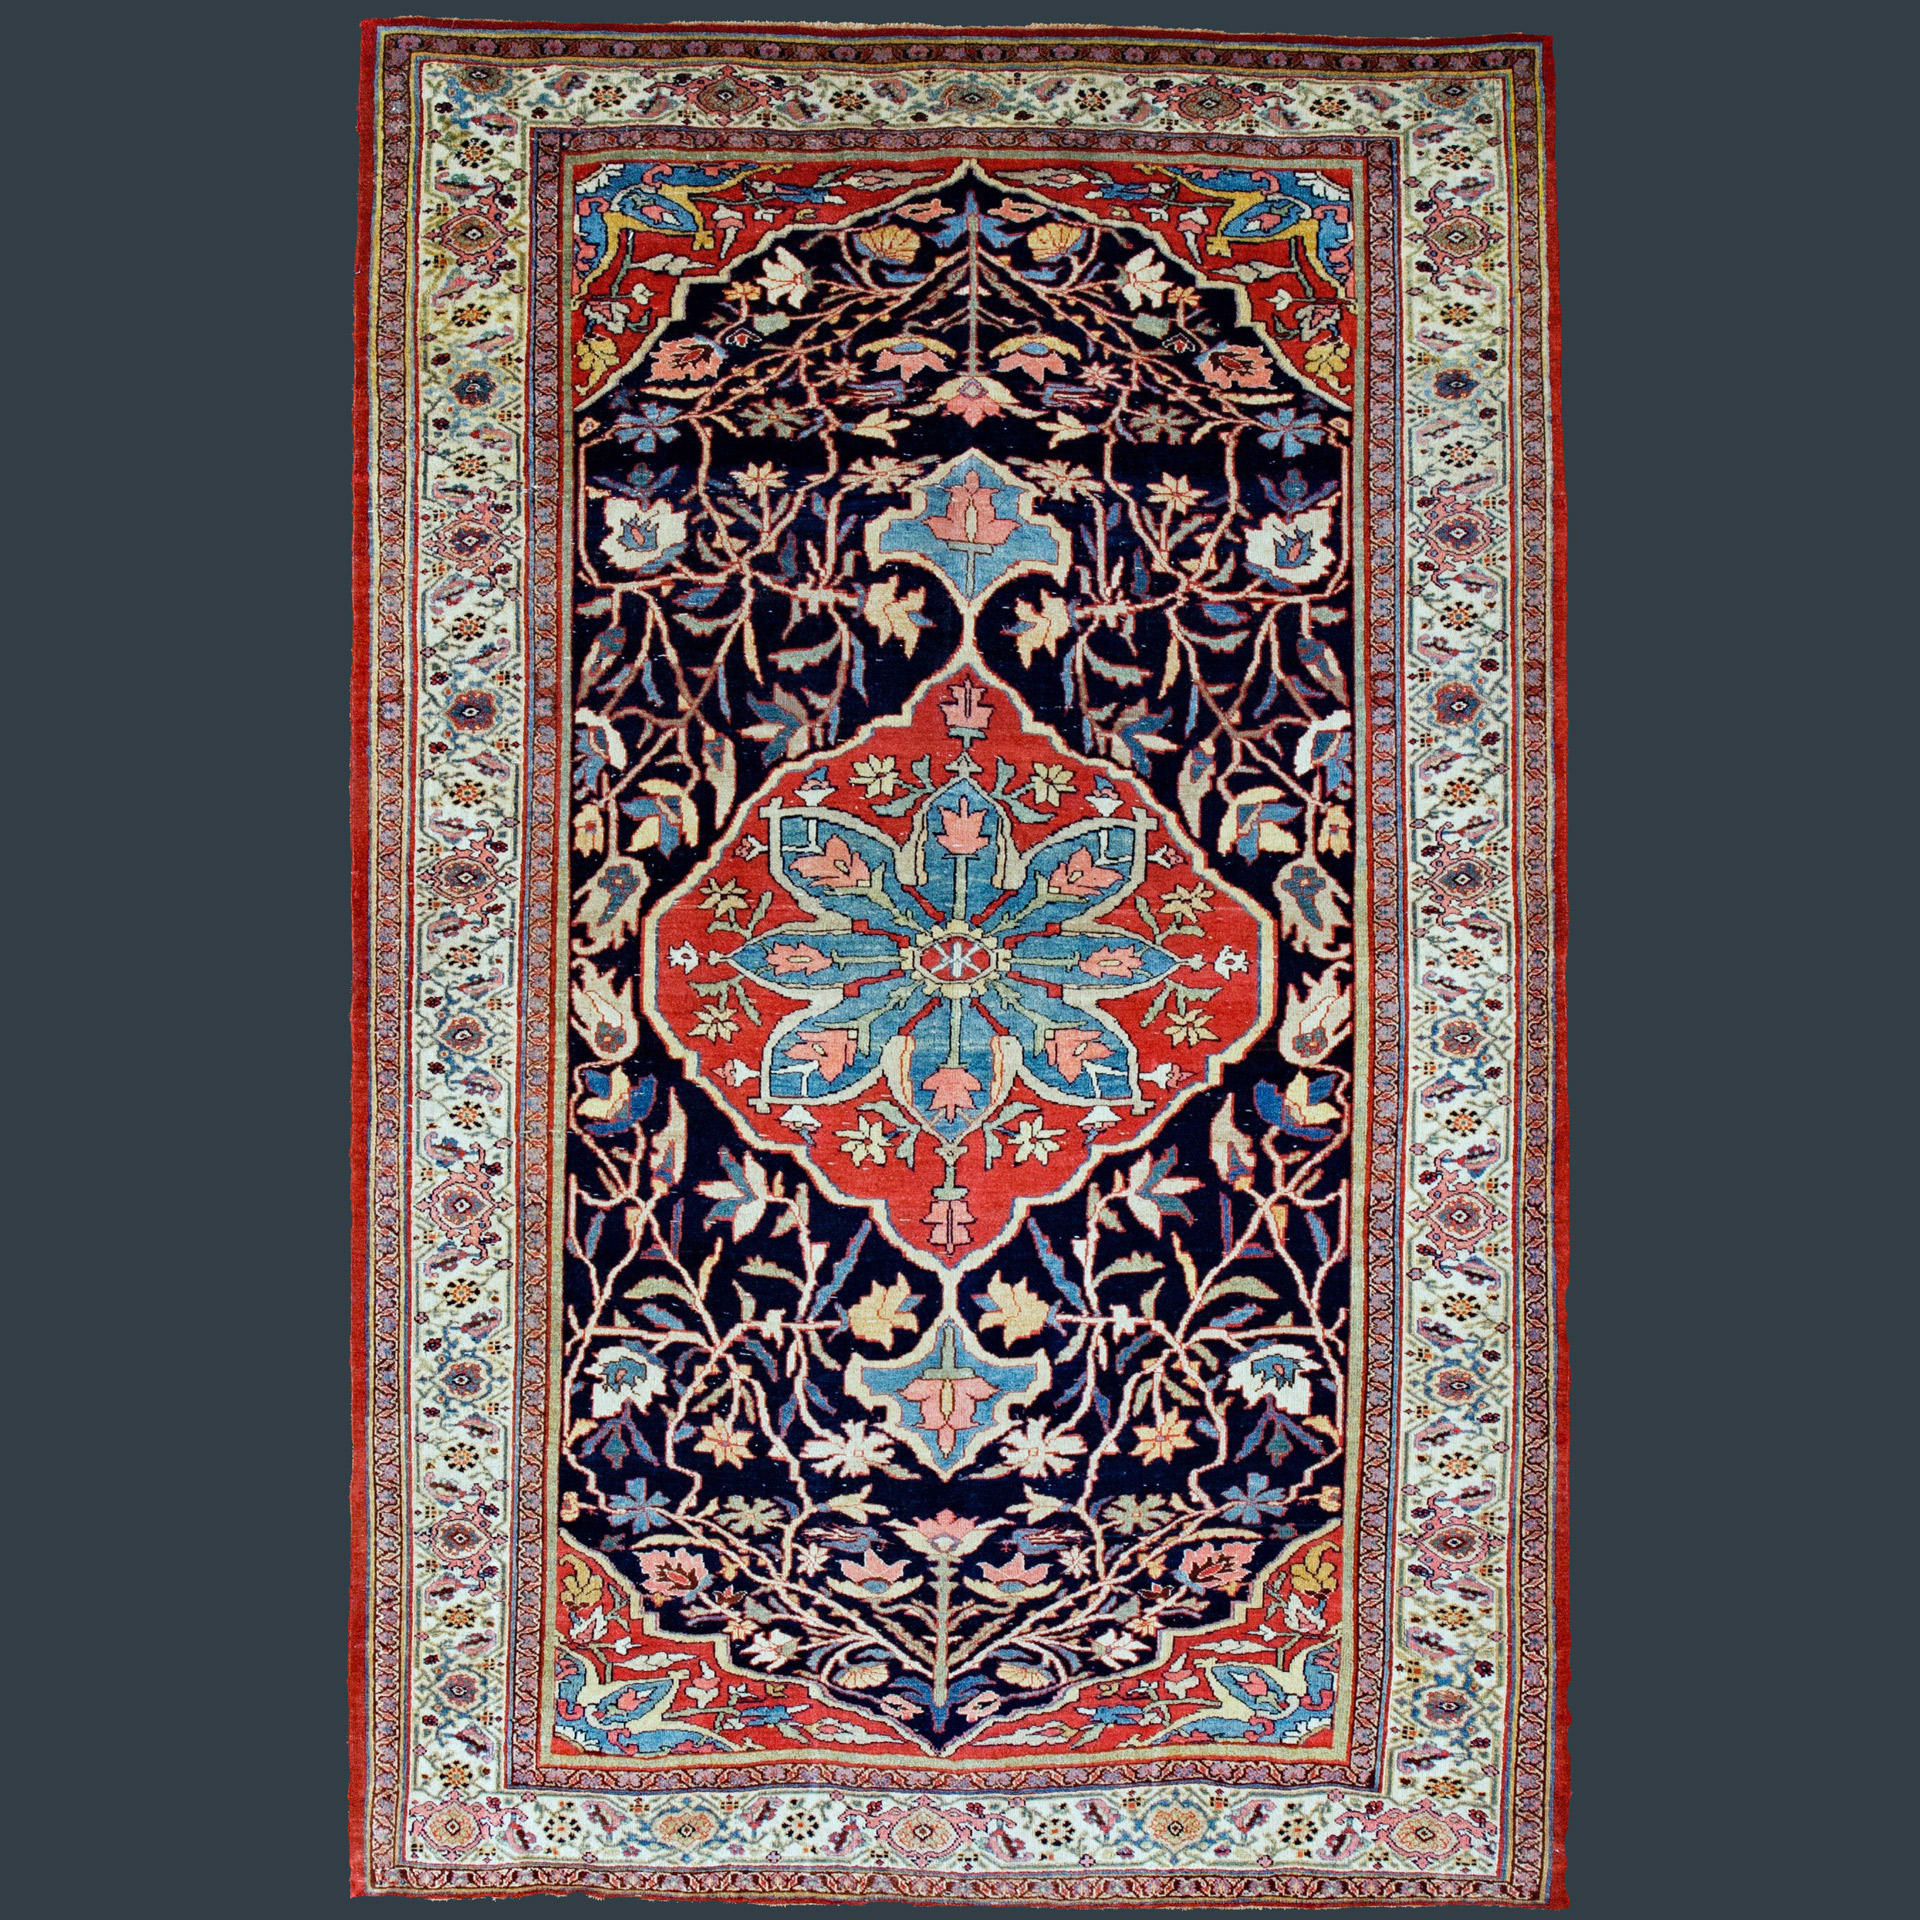 Antique Persian Bidjar rug with a red and sky blue medallion on a navy blue field, framed by an ivory Turtle design border, northwest Persia, circa 1880